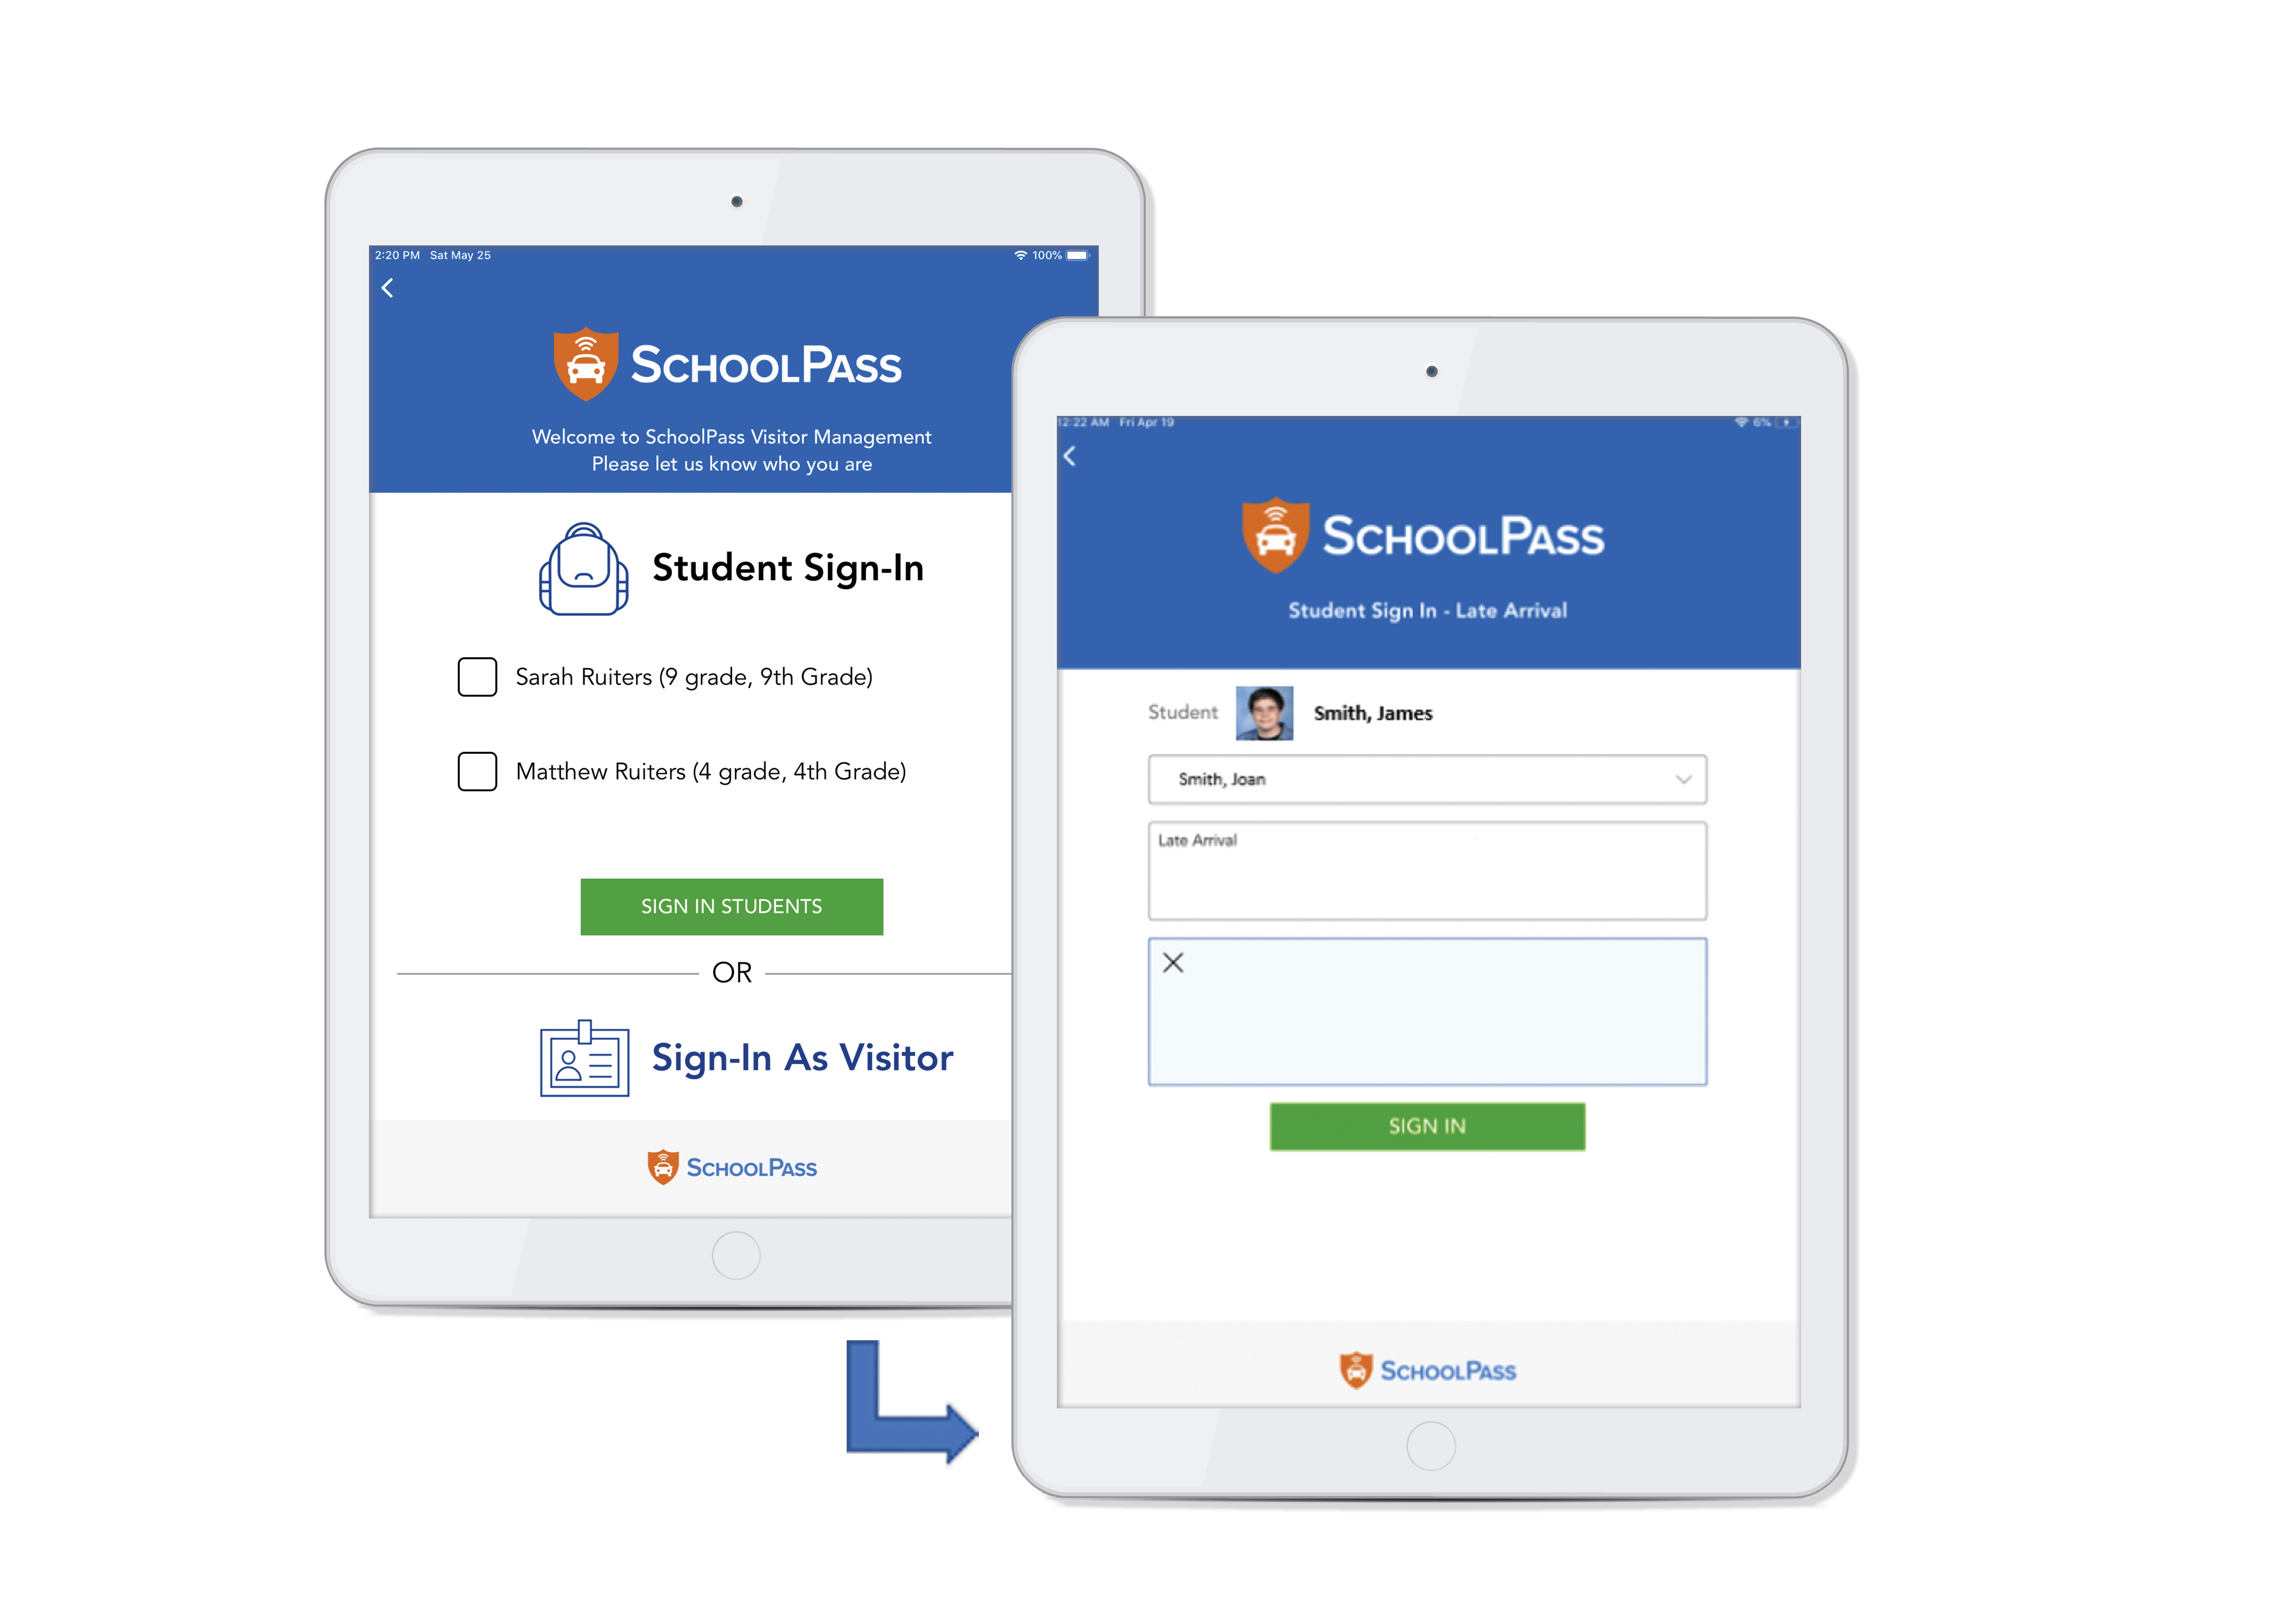 SchoolPass Visitor Management 6a5f6bee-6417-4761-b768-4a11984e89a0.png